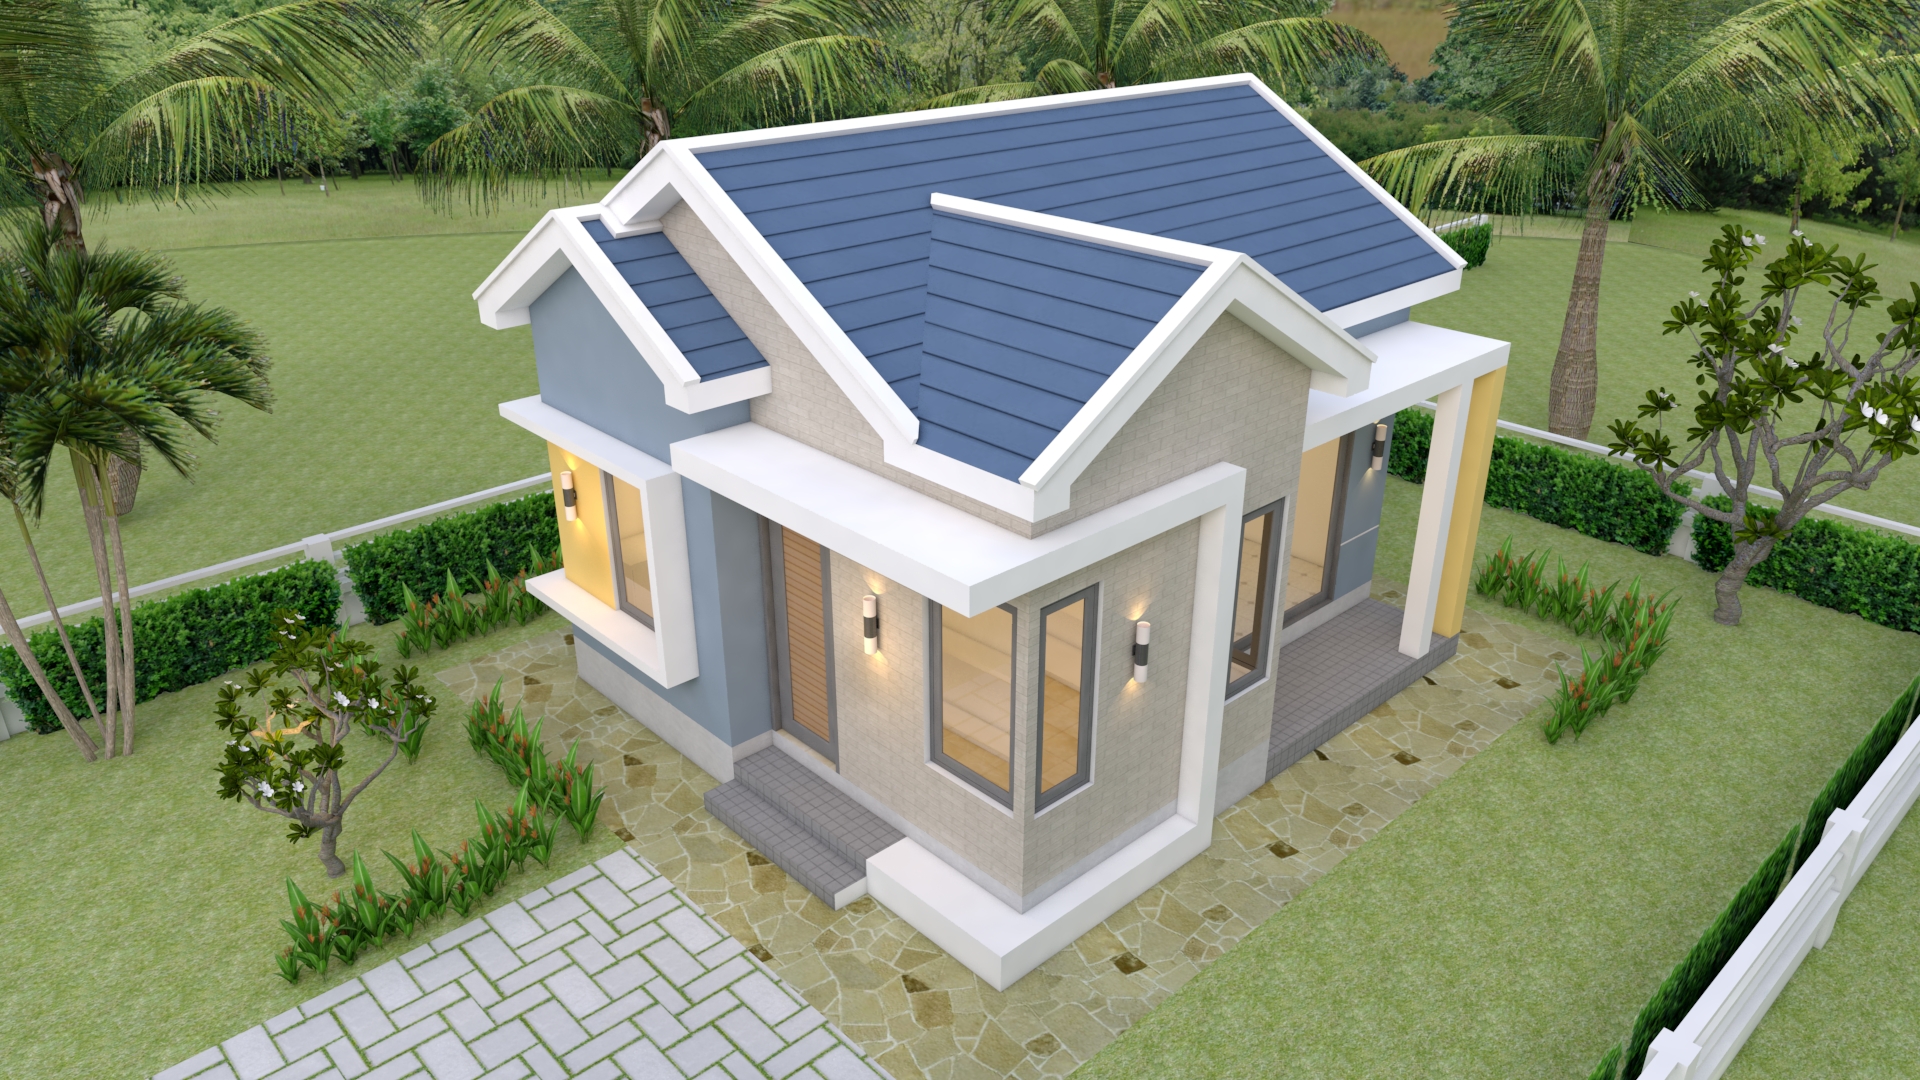 House design Plans 5.5x6.5 with One Bedroom Gable roof